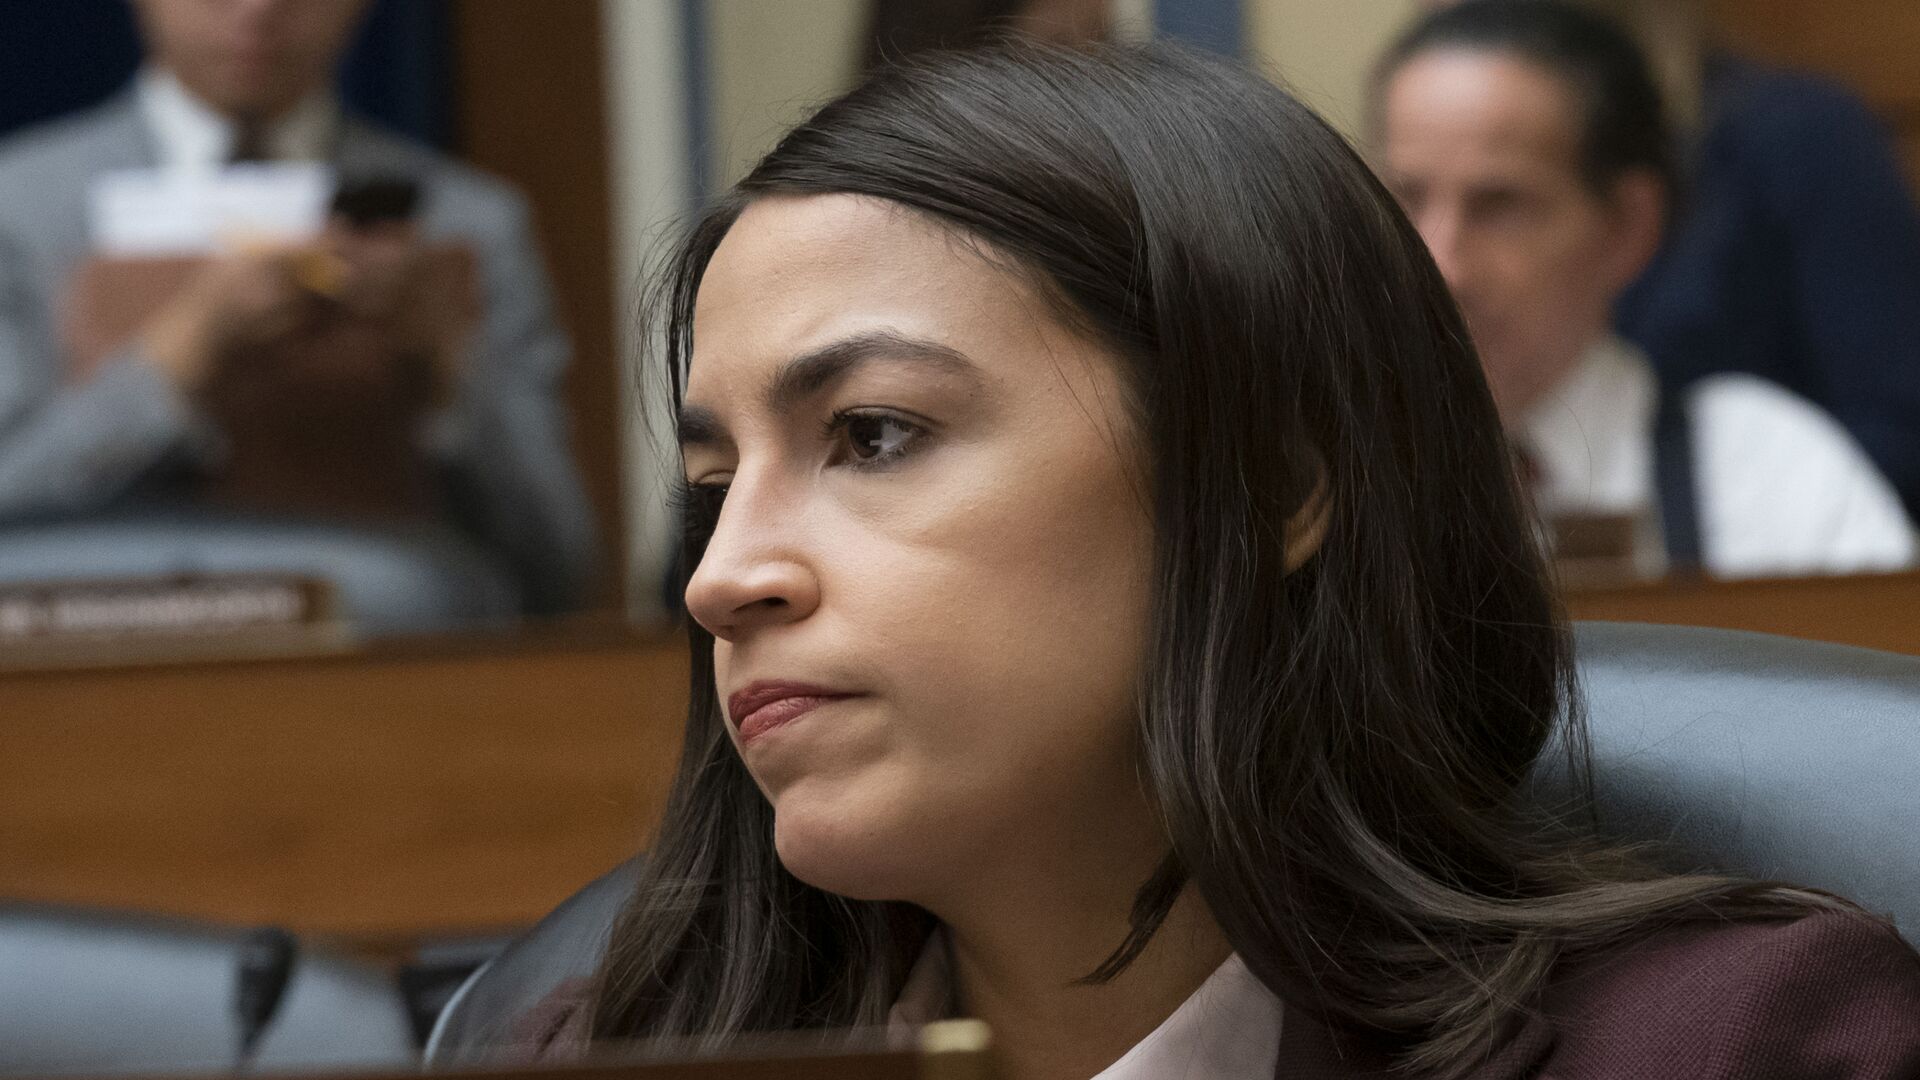 Rep. Alexandria Ocasio-Cortez, D-N.Y., attends a House Oversight Committee hearing on high prescription drugs prices shortly after her private meeting with Speaker of the House Nancy Pelosi, D-Calif., on Capitol Hill in Washington, 26 July 2019 - Sputnik International, 1920, 09.06.2021